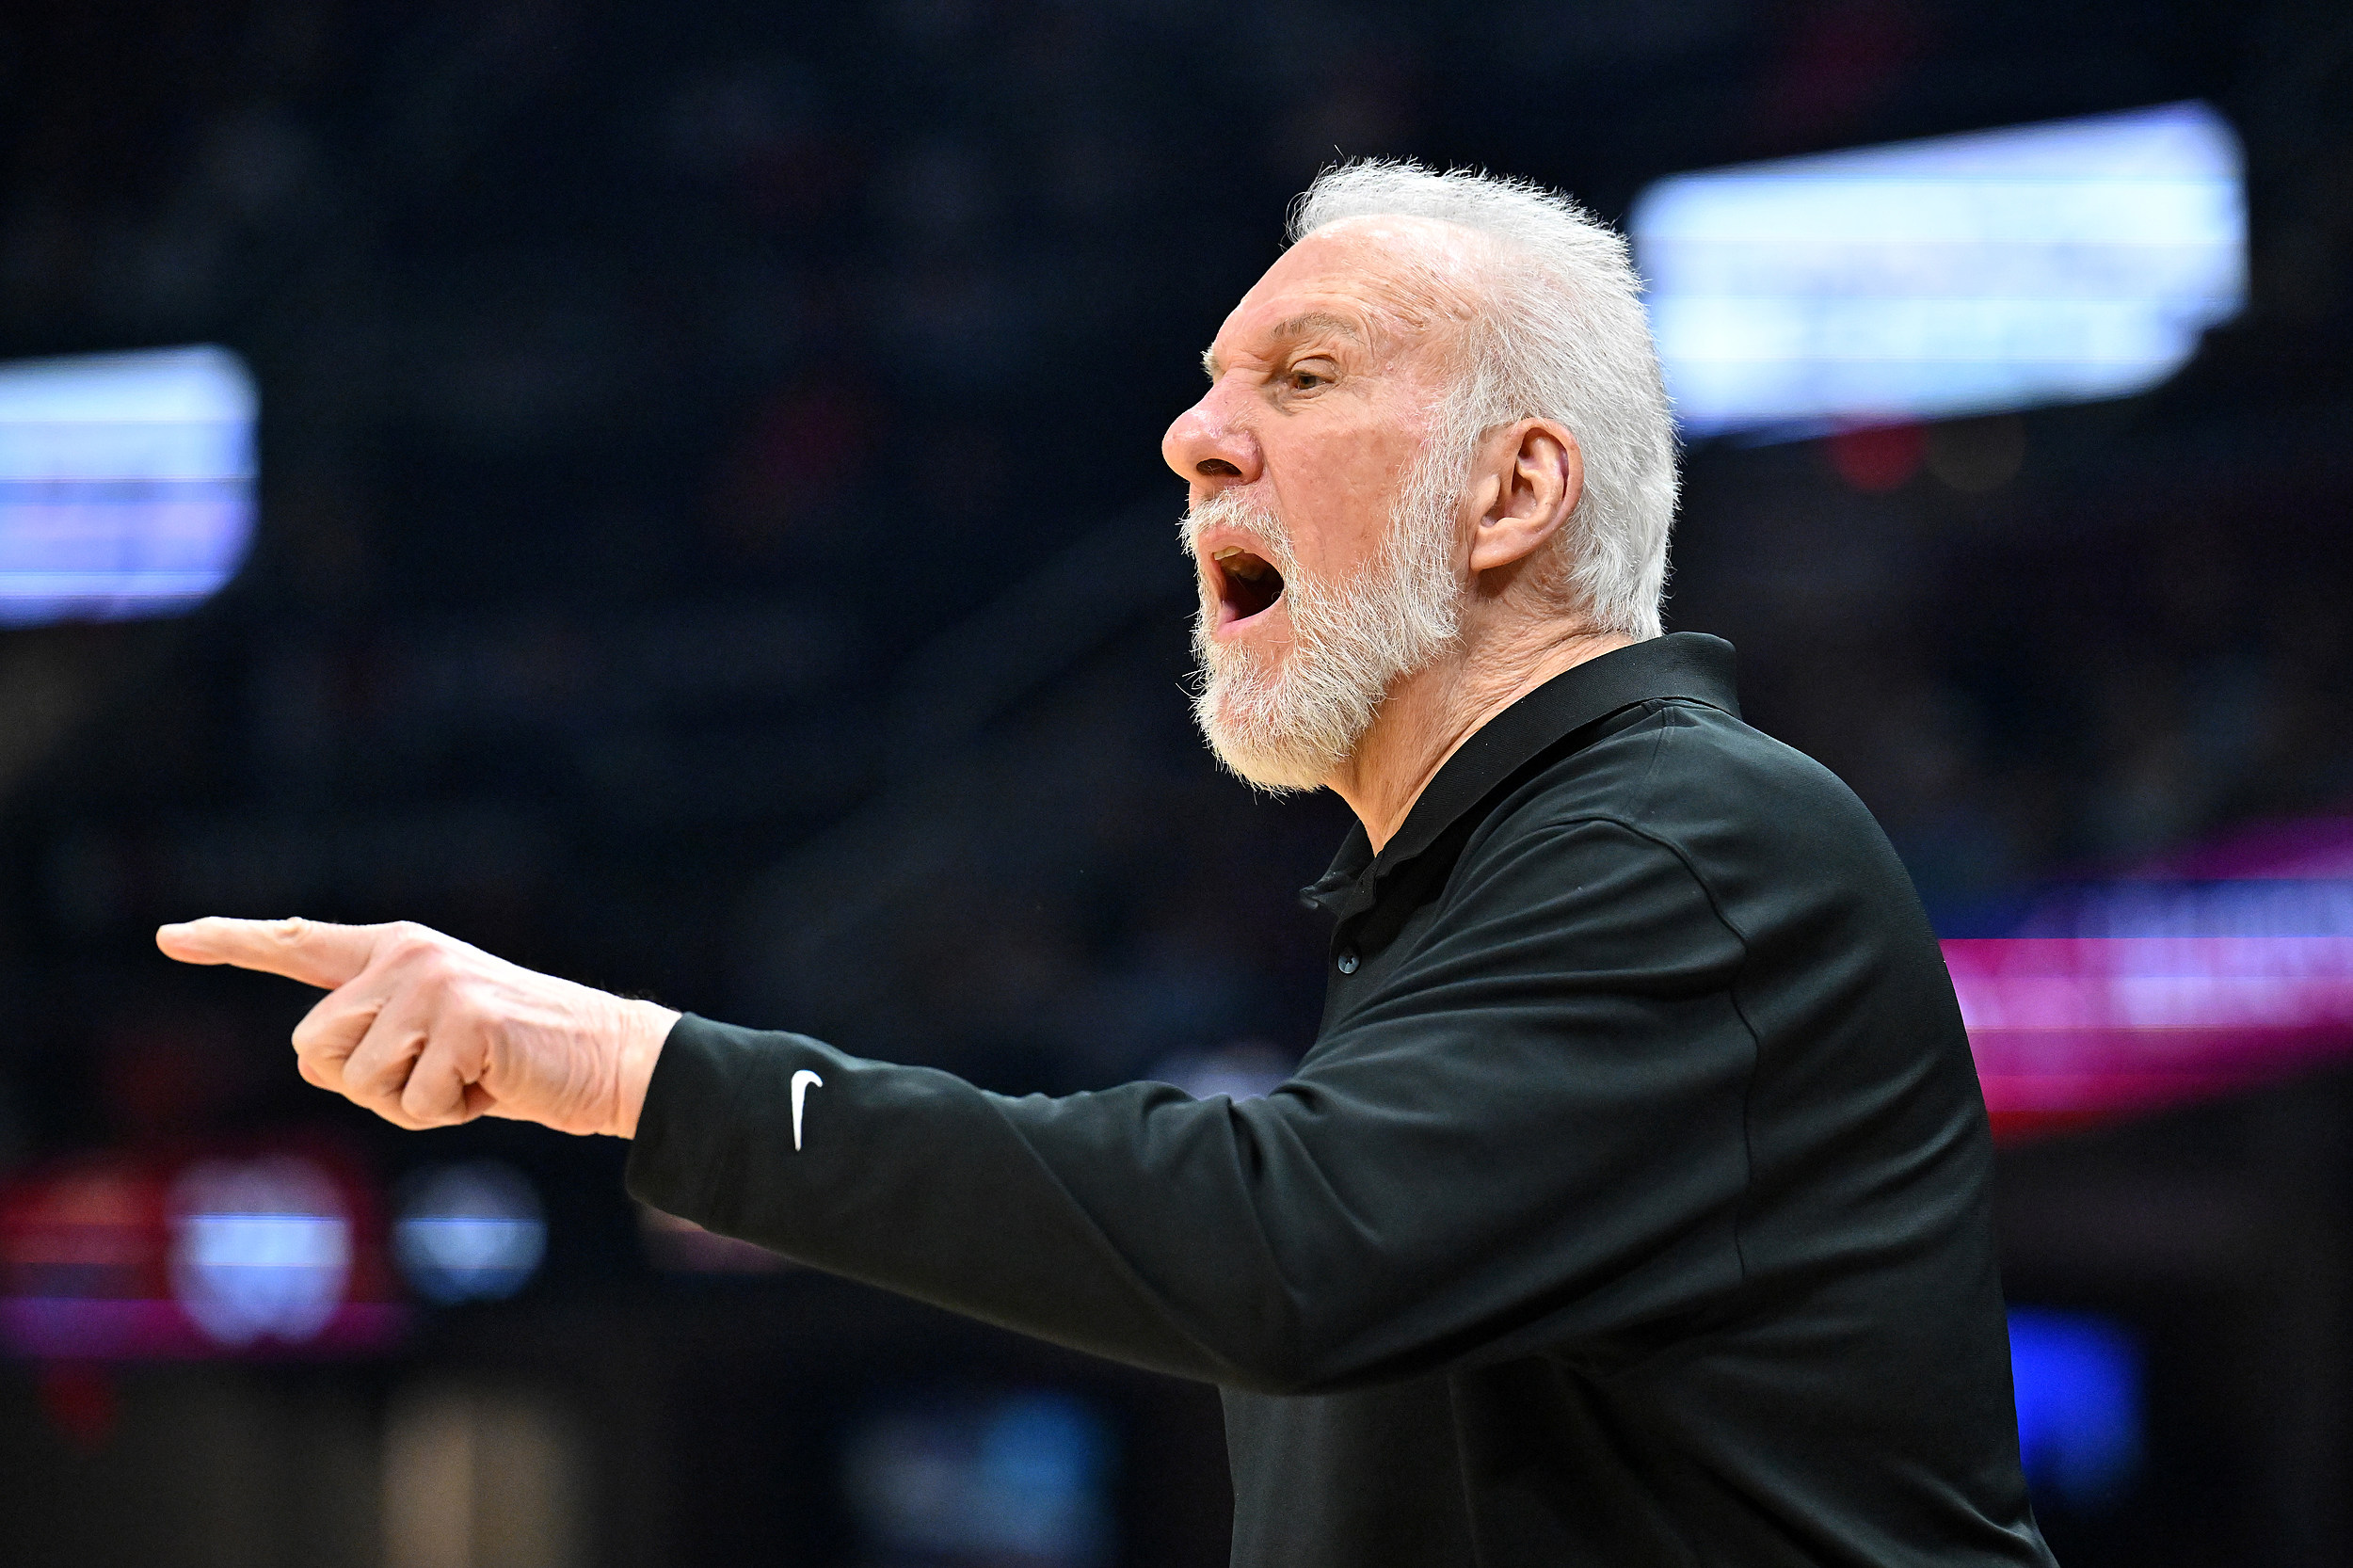 Spurs' Popovich: 'There was really no defense' for Lakers' Kobe